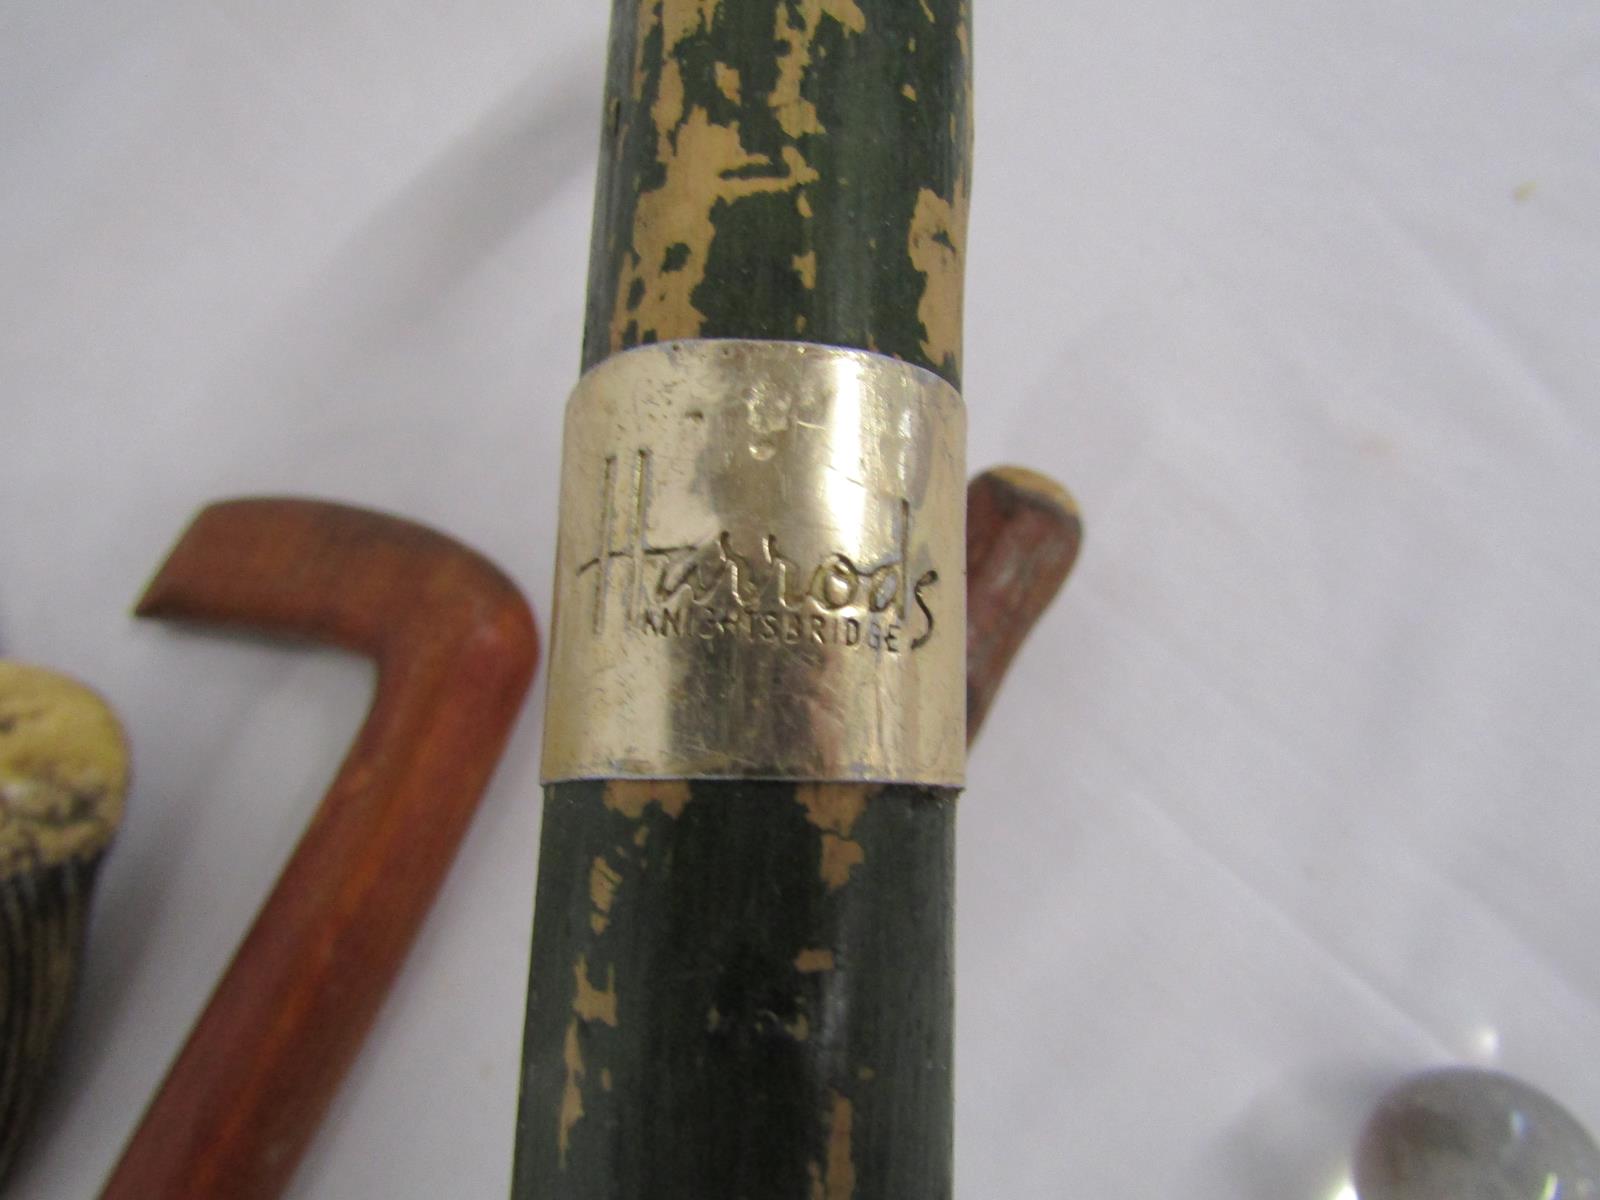 Collection of walking sticks includes Harrods, horn handle, gnarly wood handle etc - Image 6 of 6